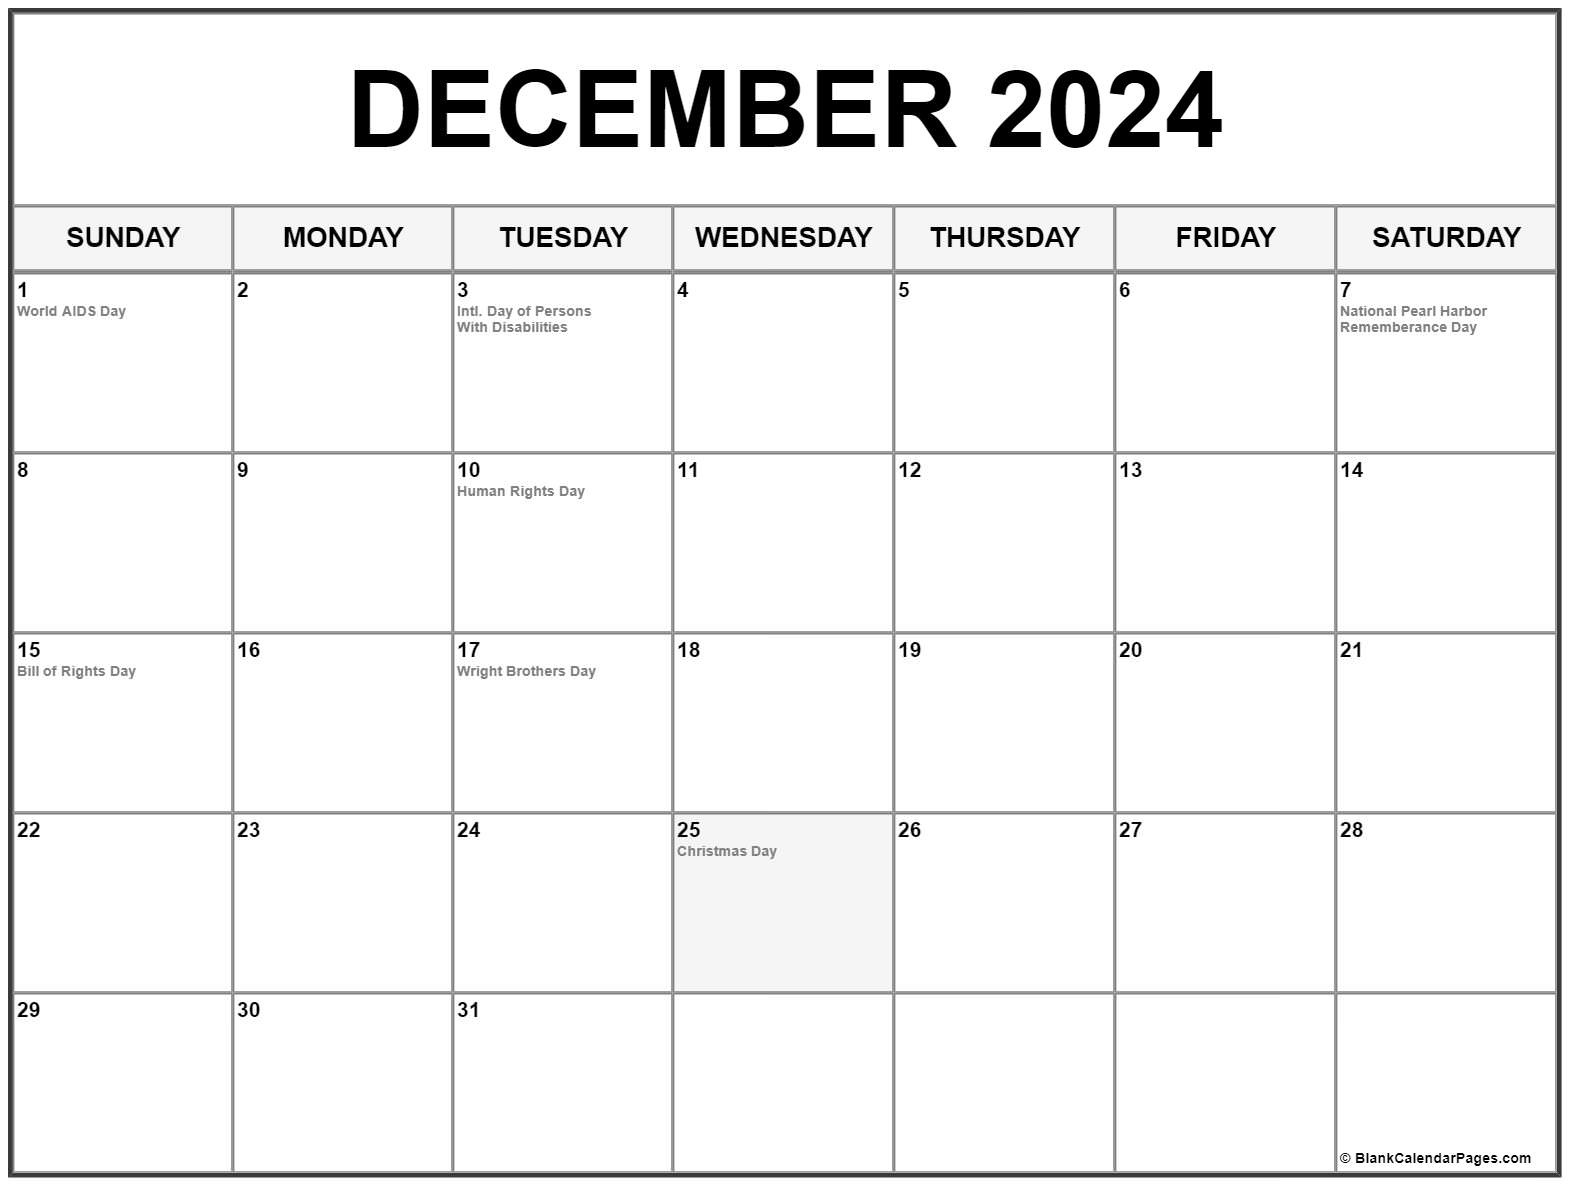 December 2024 With Holidays Calendar for Free Printable December 2024 Calendar With Holidays